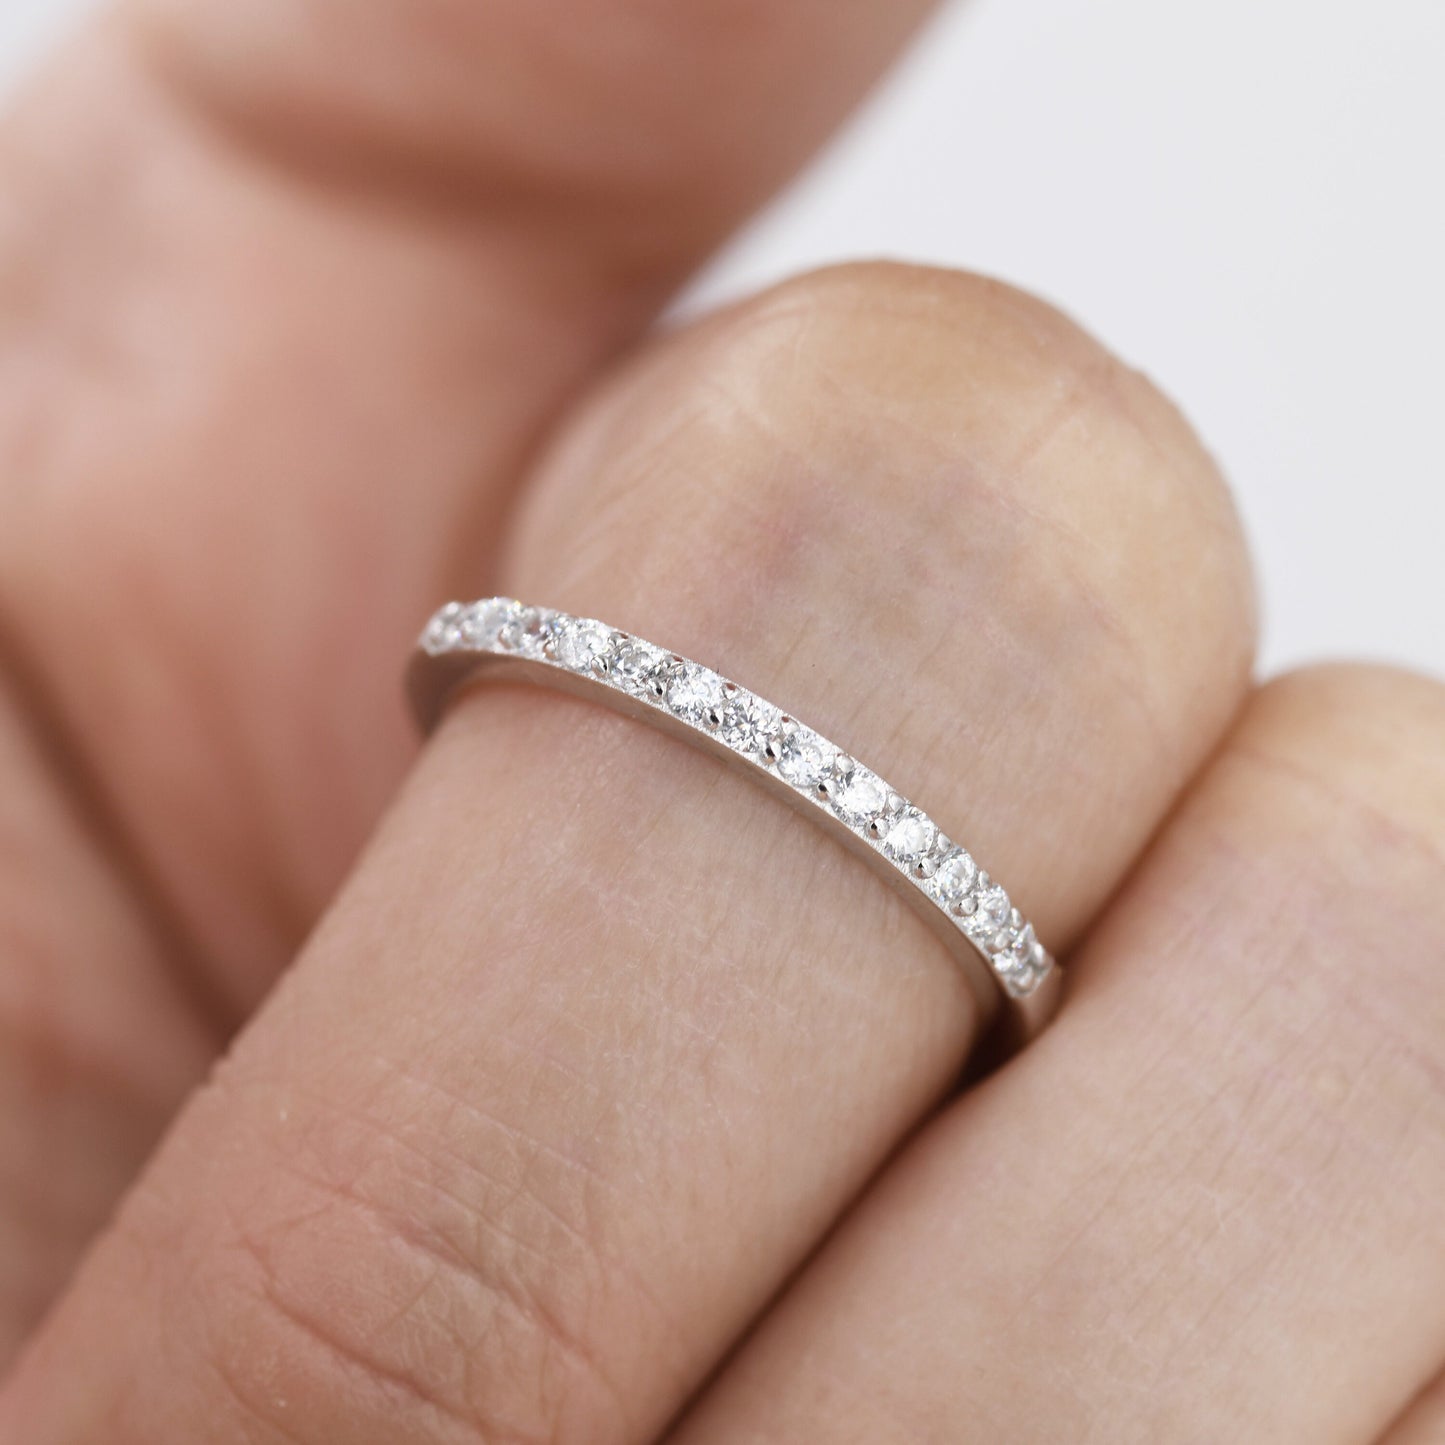 Half Eternity CZ Ring in Sterling Silver,  Silver or Gold, Sparkly CZ Skinny Ring, Minimalist Stacking Ring US 5 - 8